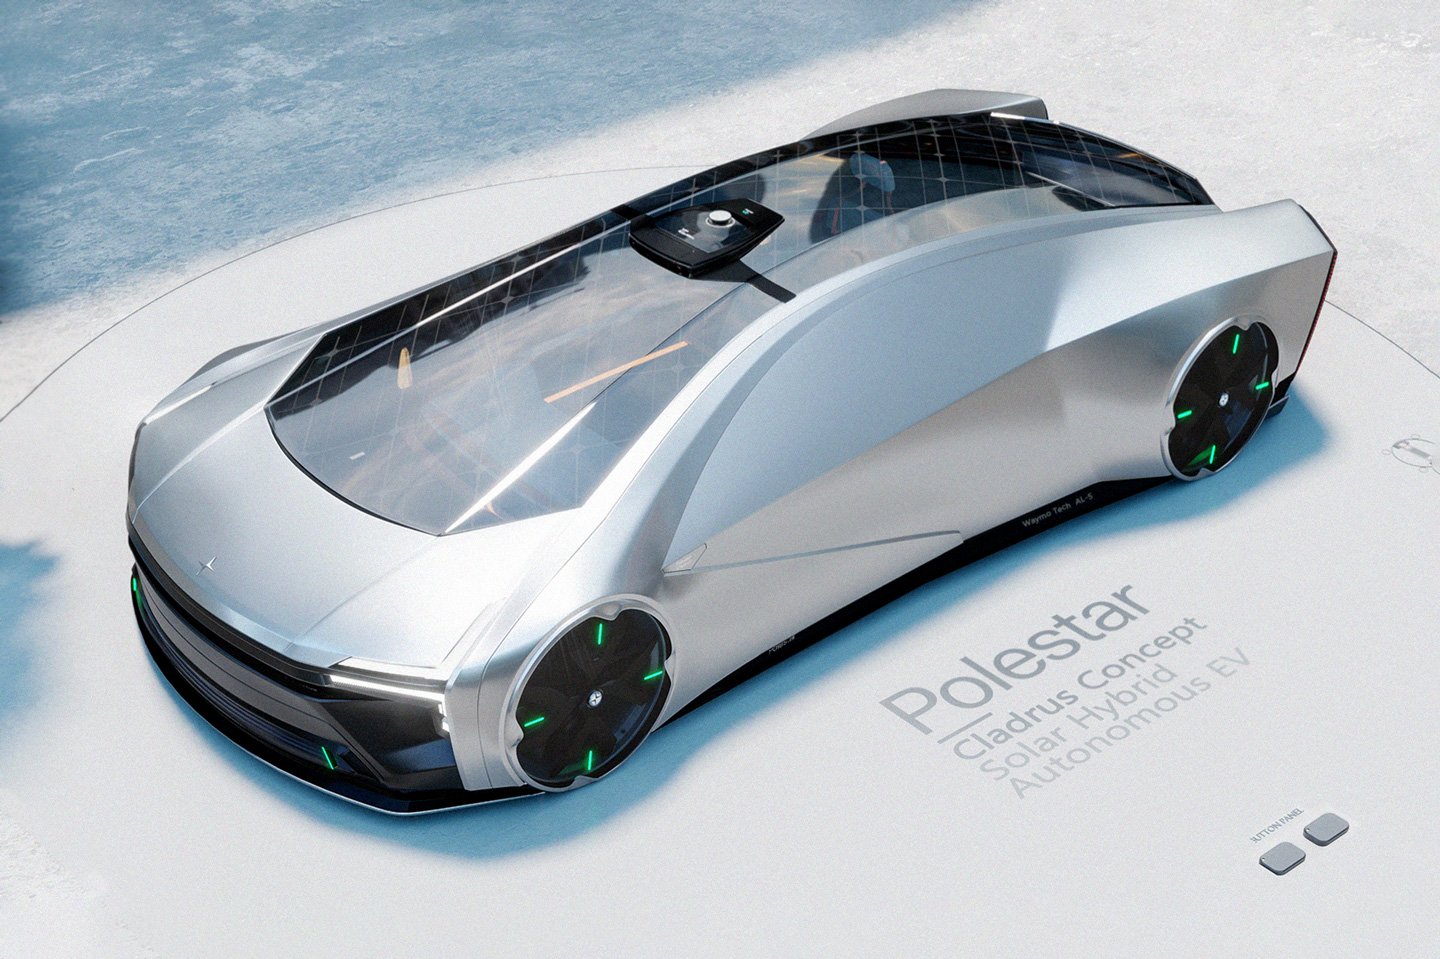 #The Polestar Cladrus Concept runs partially on solar power, making it the company’s cleanest car yet